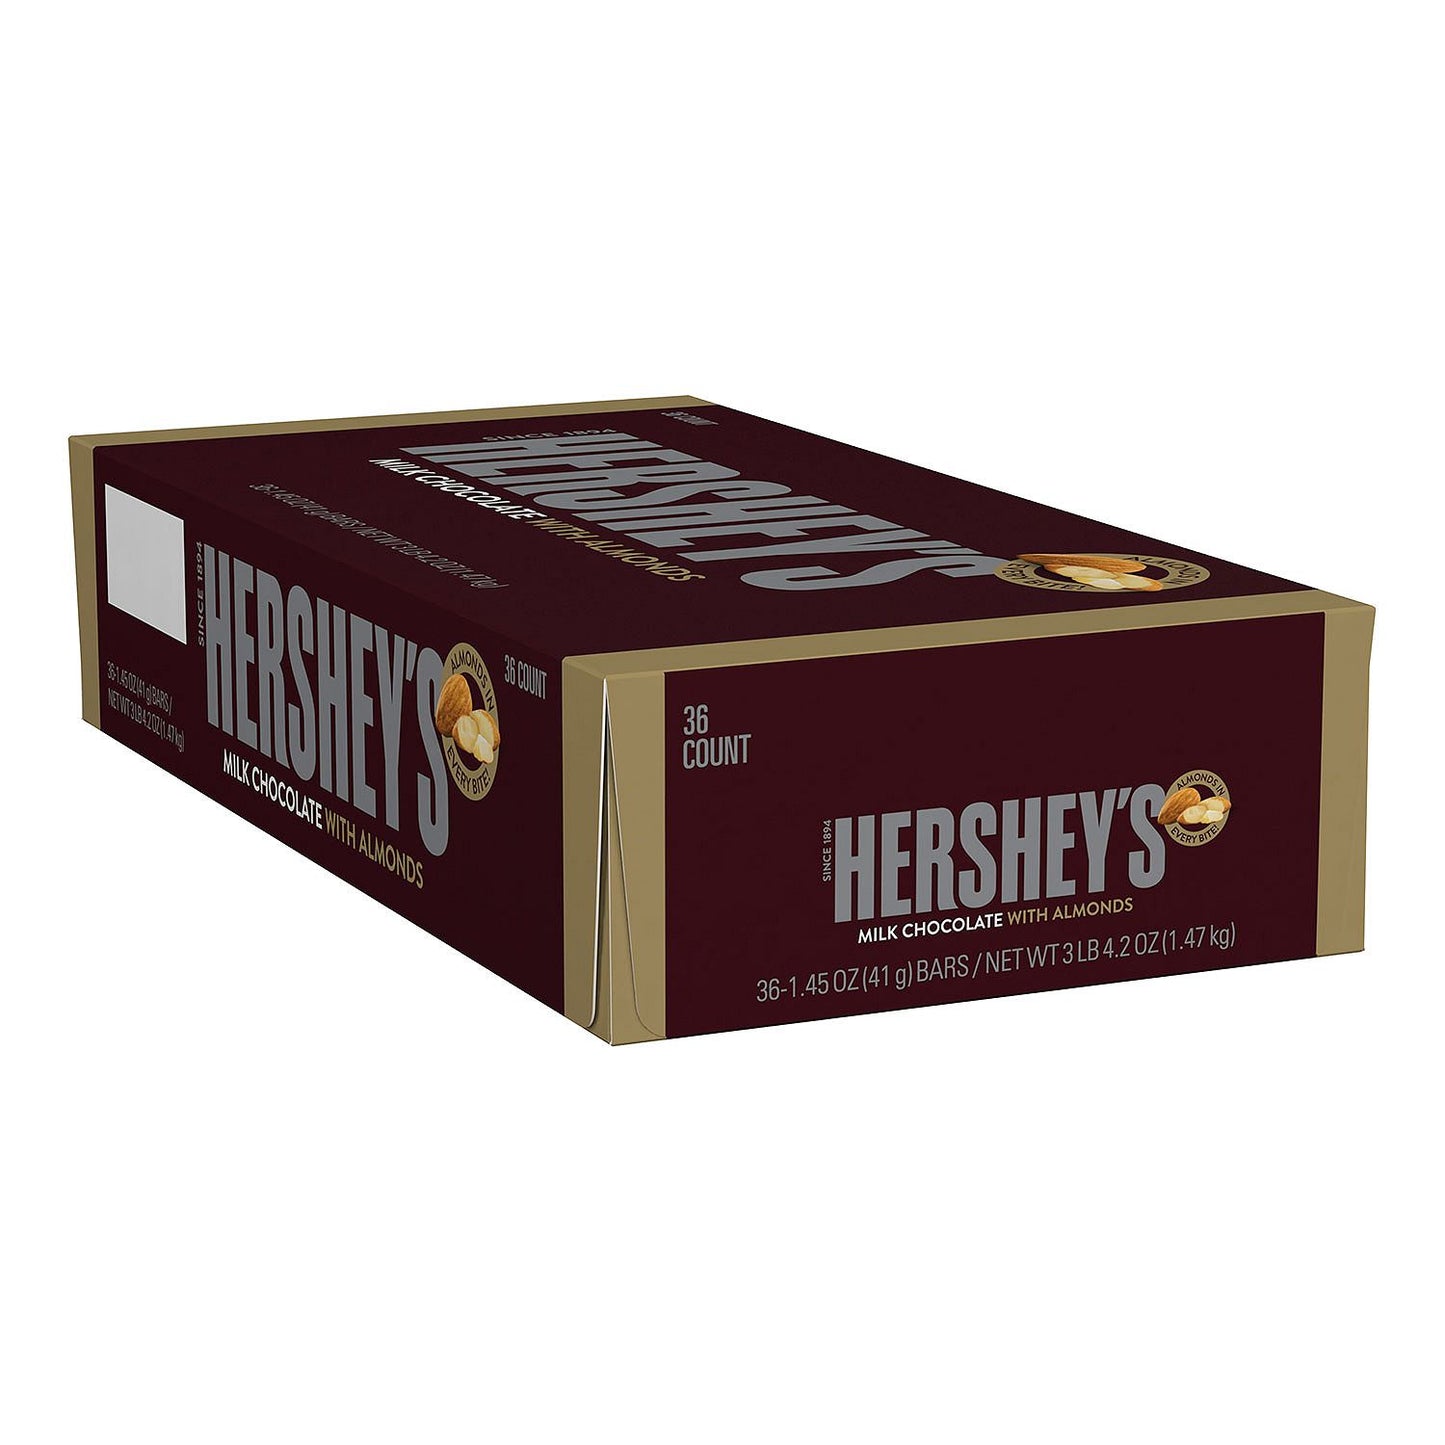 HERSHEY'S Milk Chocolate with Whole Almonds Candy Bars (1.45 oz., 36 ct.)